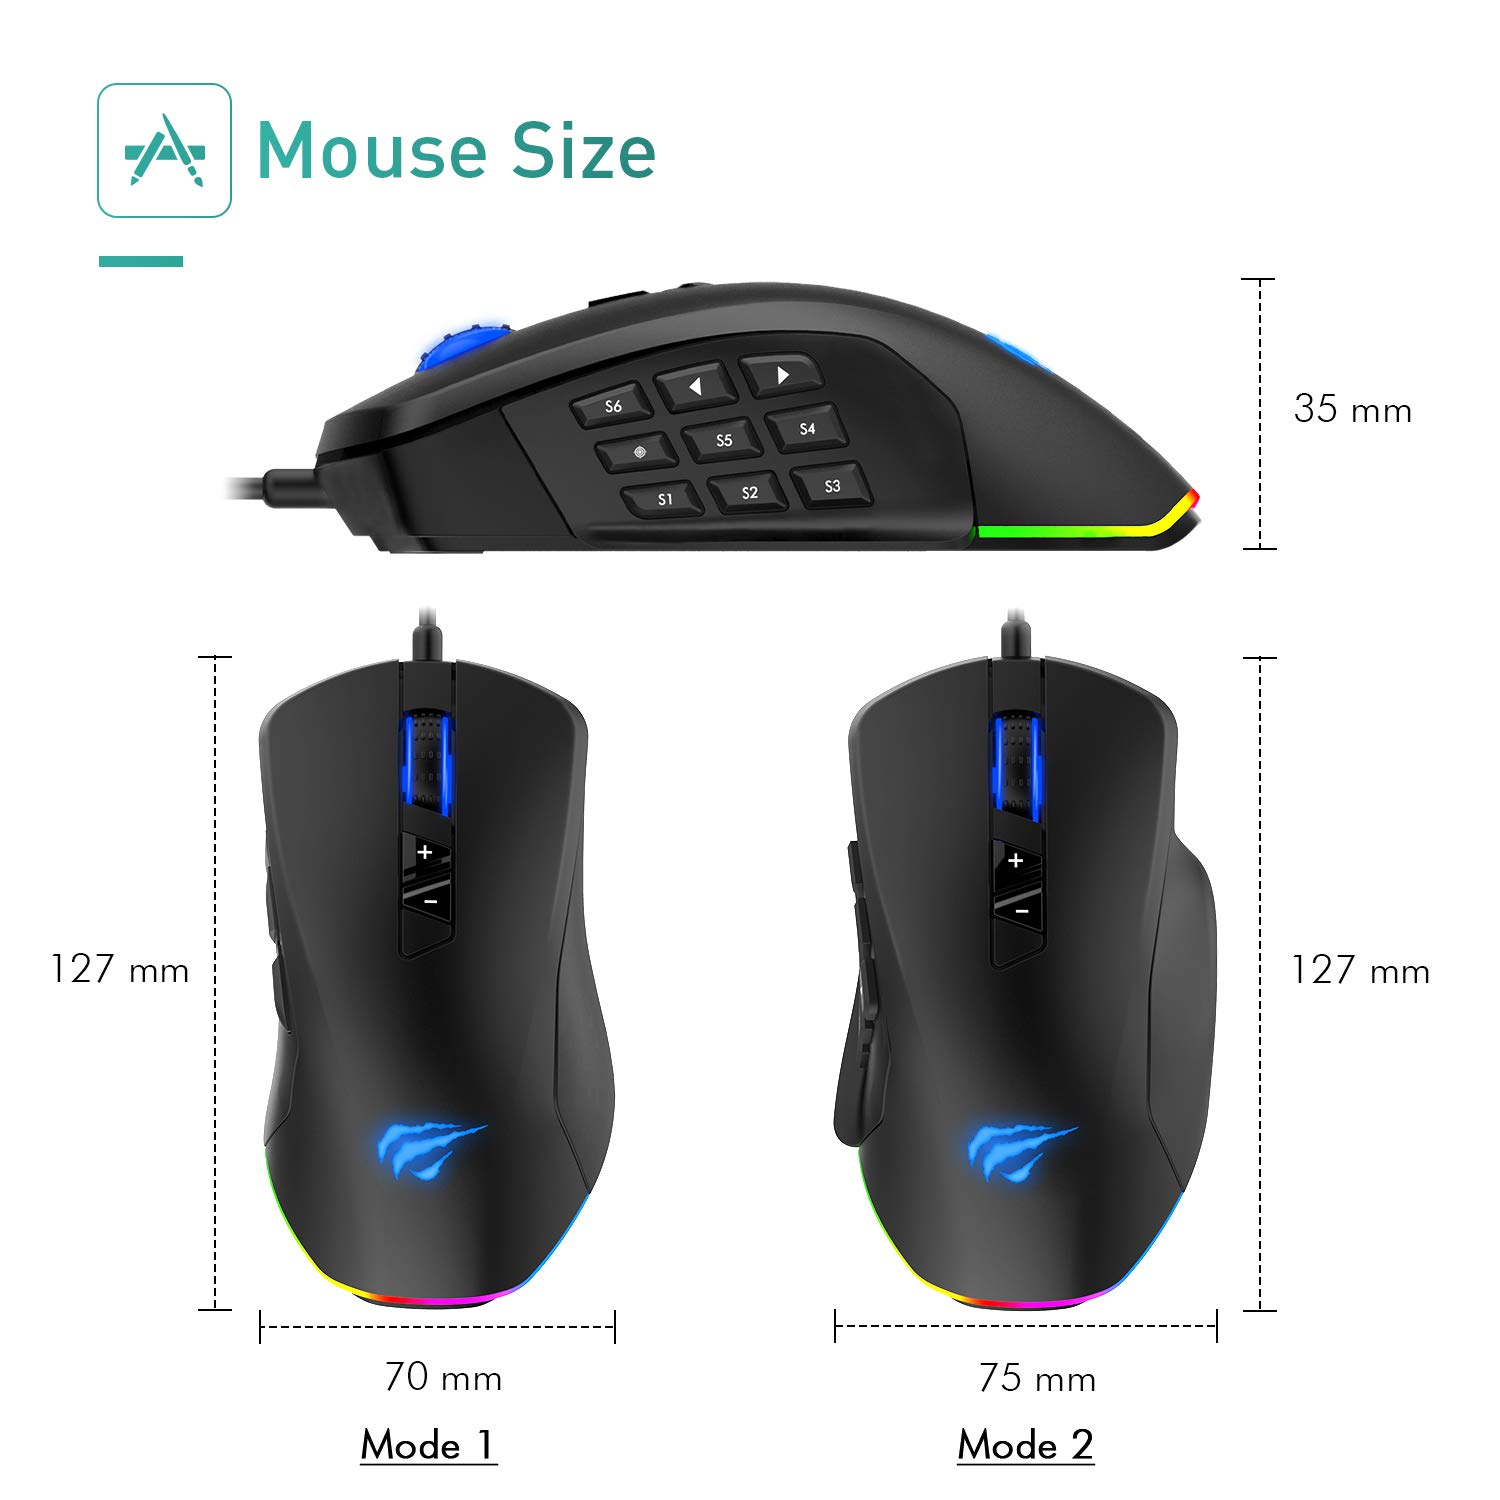 HAVIT MS760 Pro Gaming Mouse with 12000 DPI, Interchangeable Side Plates, Customizable RGB Backligts (Upgraded Version)